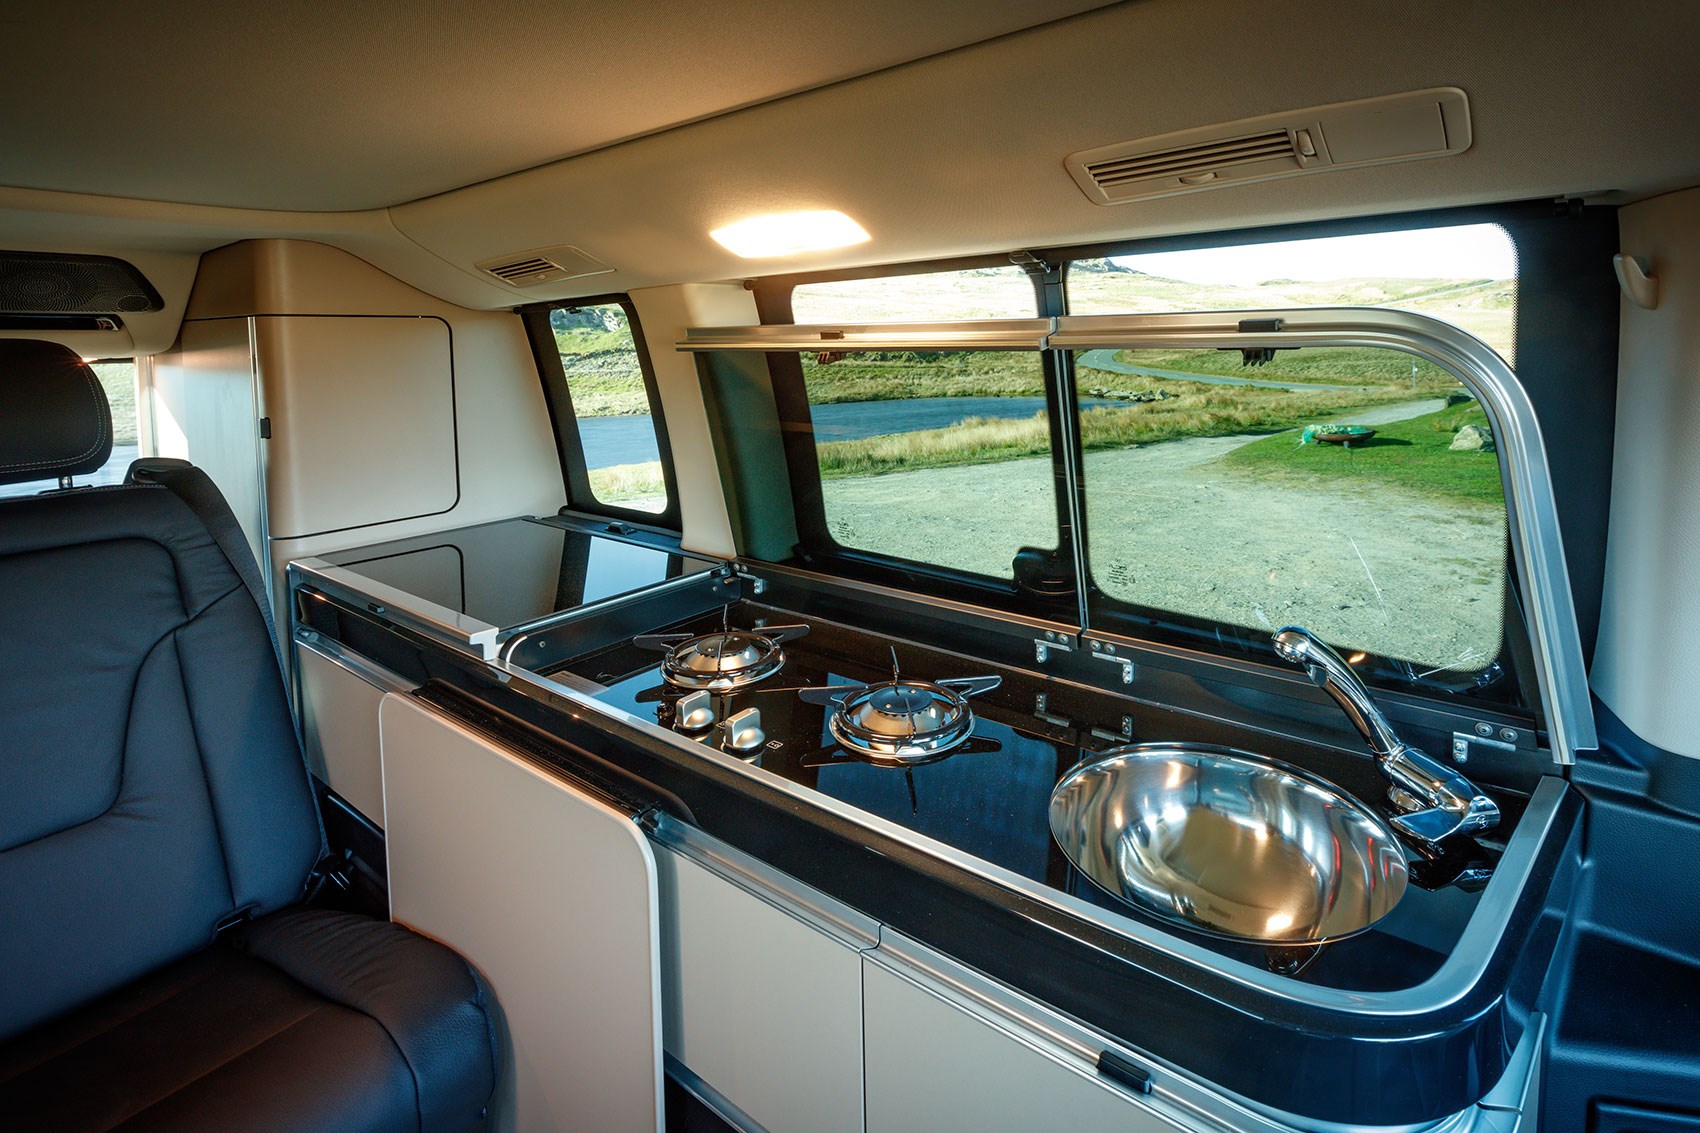 The kitchen in a Mercedes Marco Polo camper van